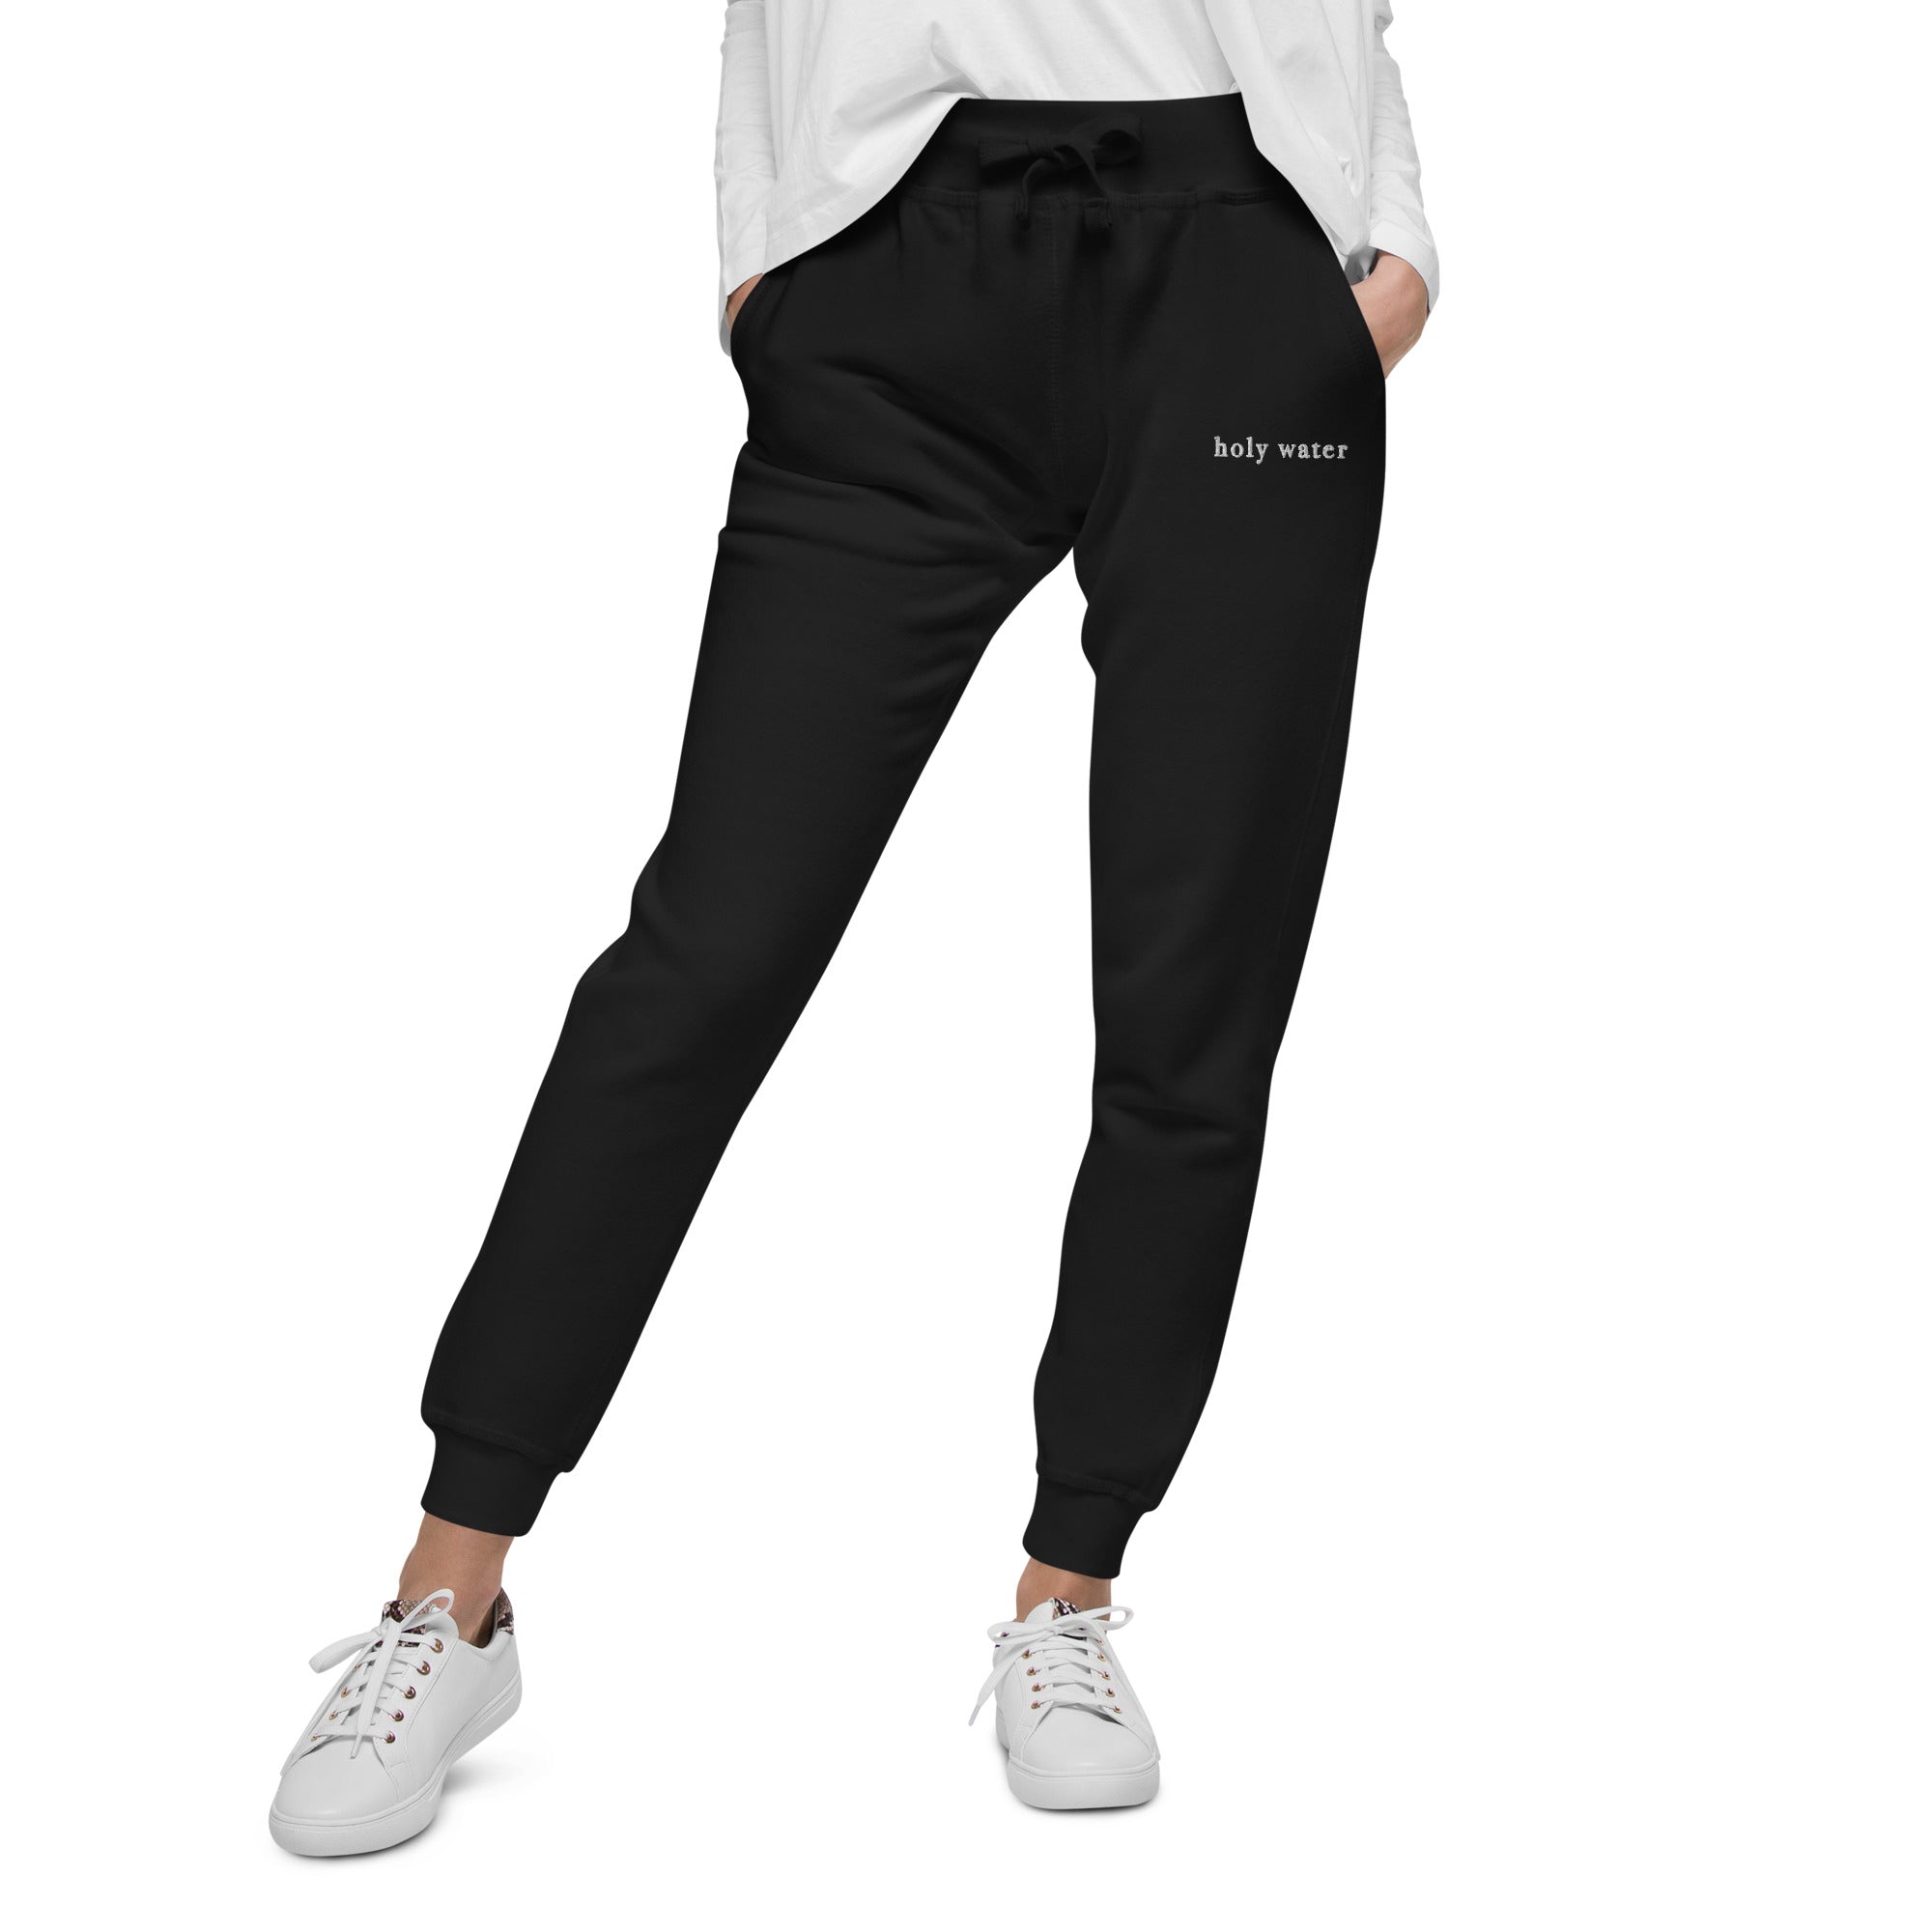 Holy Water Embroidered w Unisex fleece sweatpants, The Belonging Company